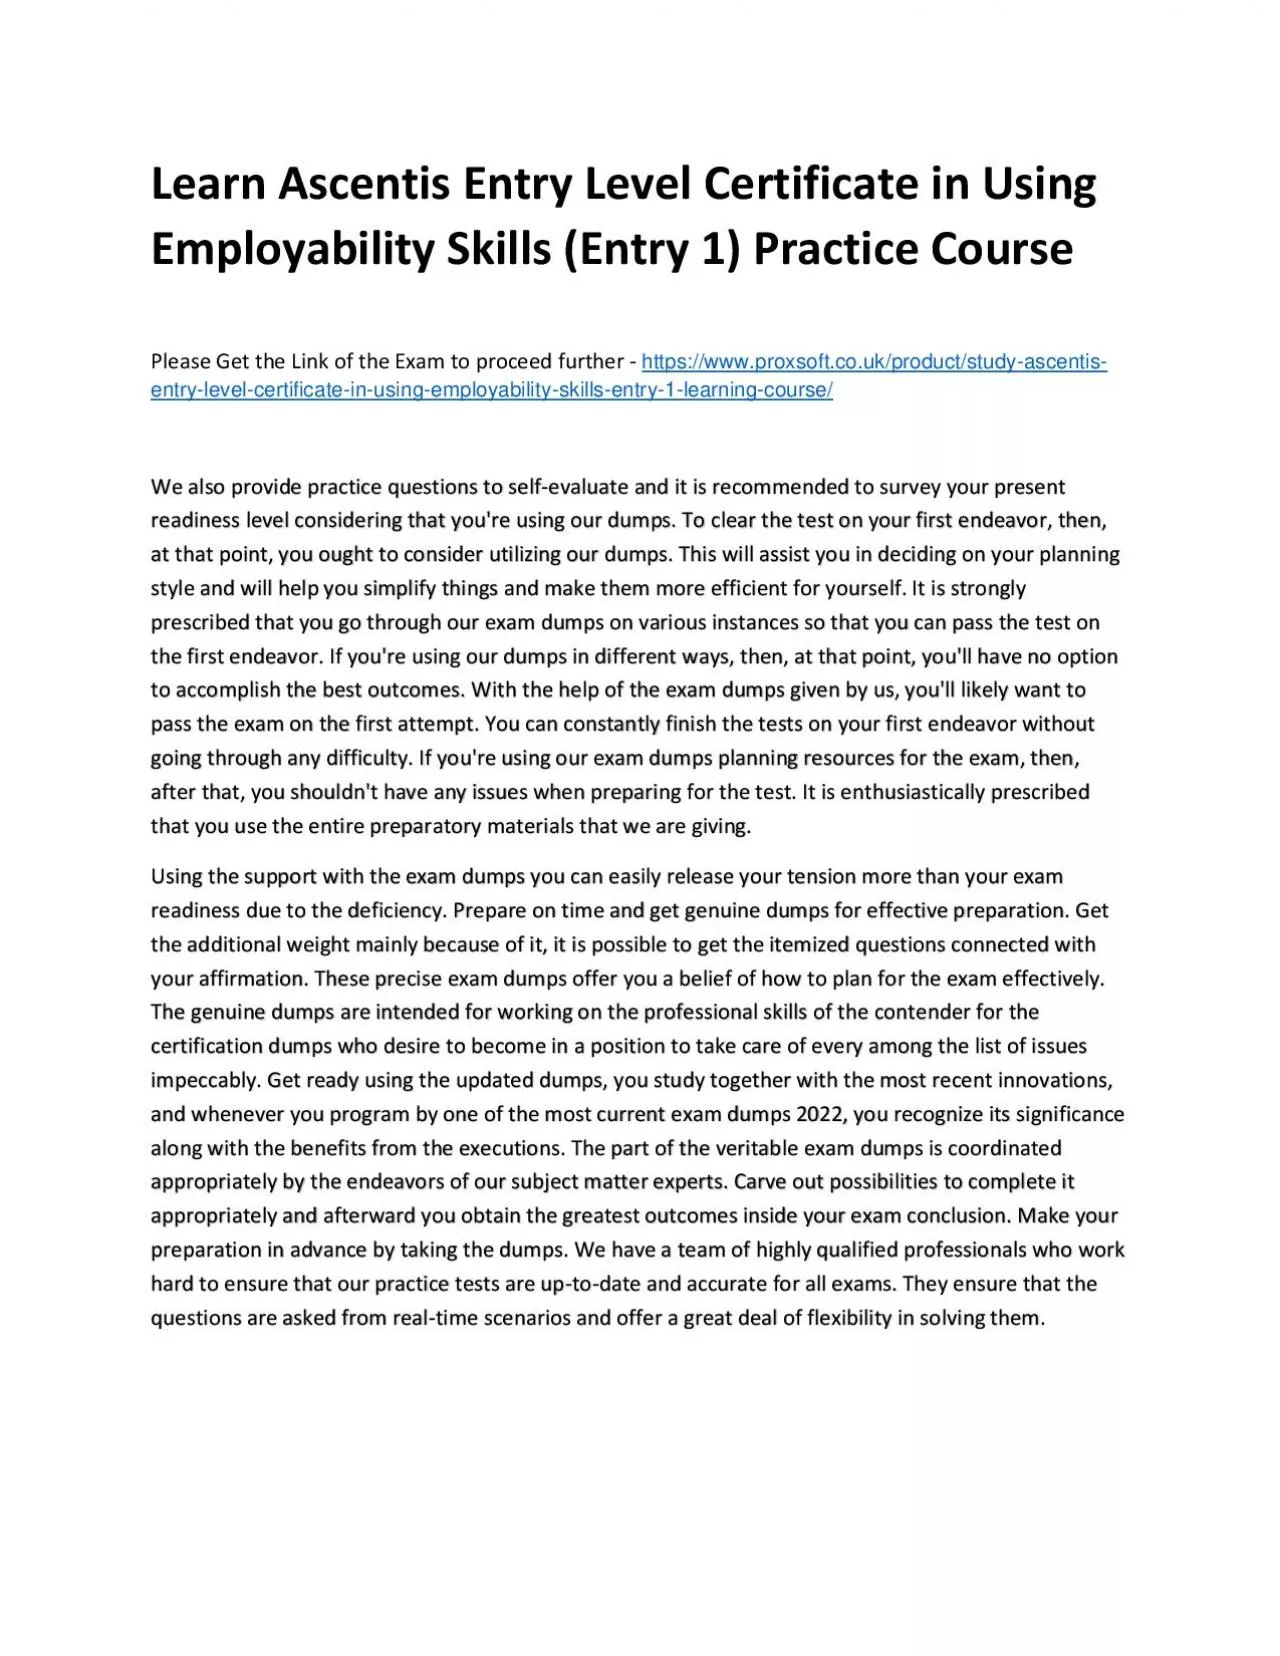 Learn Ascentis Entry Level Certificate in Using Employability Skills (Entry 1) Practice